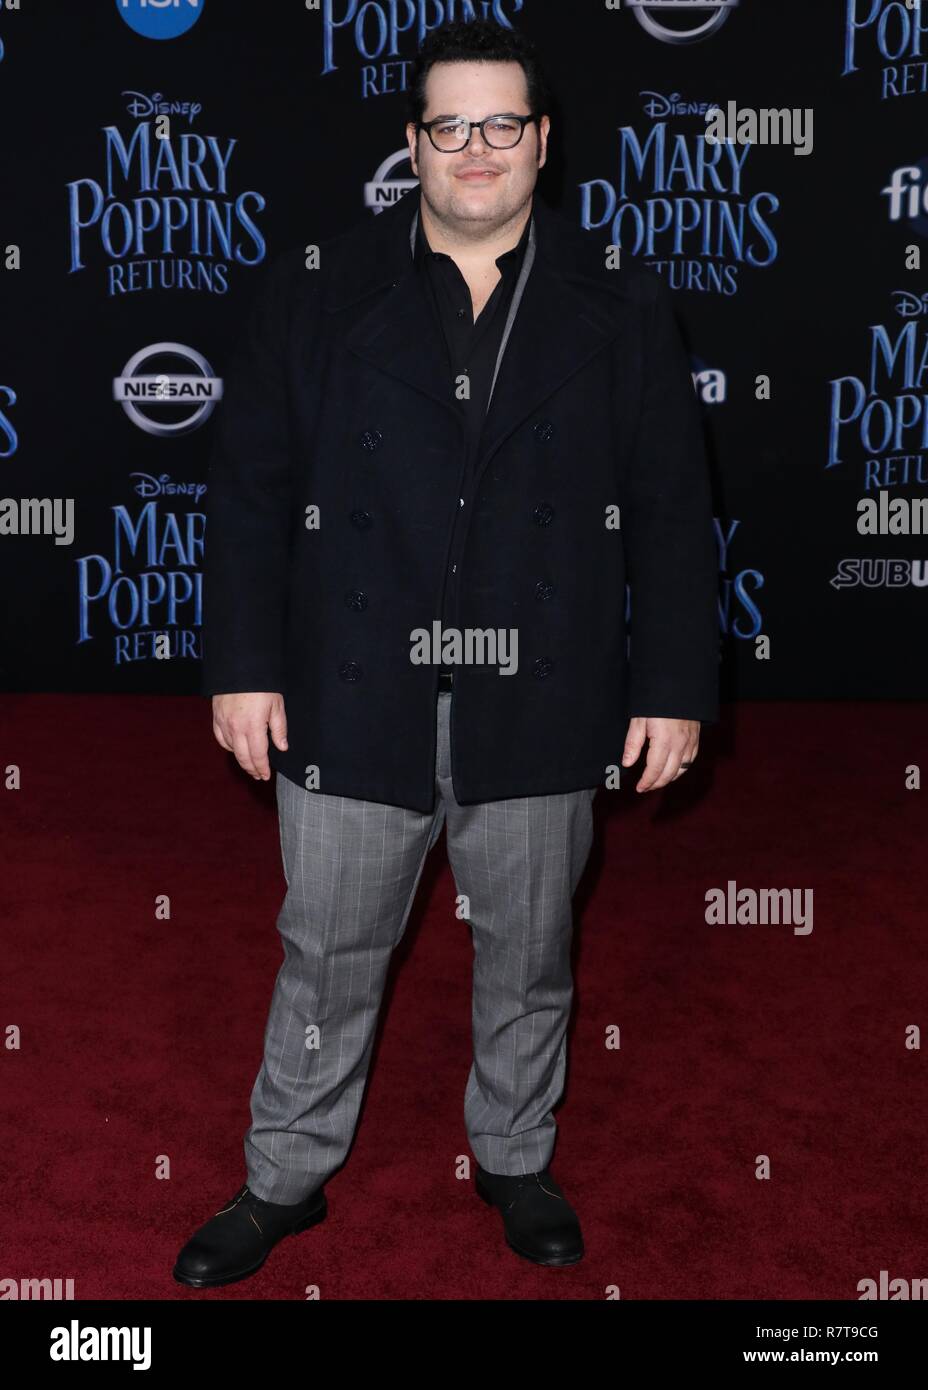 HOLLYWOOD, LOS ANGELES, CA, USA - NOVEMBER 29: Josh Gad arrives at the World Premiere Of Disney's 'Mary Poppins Returns' held at the El Capitan Theatre on November 29, 2018 in Hollywood, Los Angeles, California, United States. (Photo by David Acosta/Image Press Agency) Stock Photo